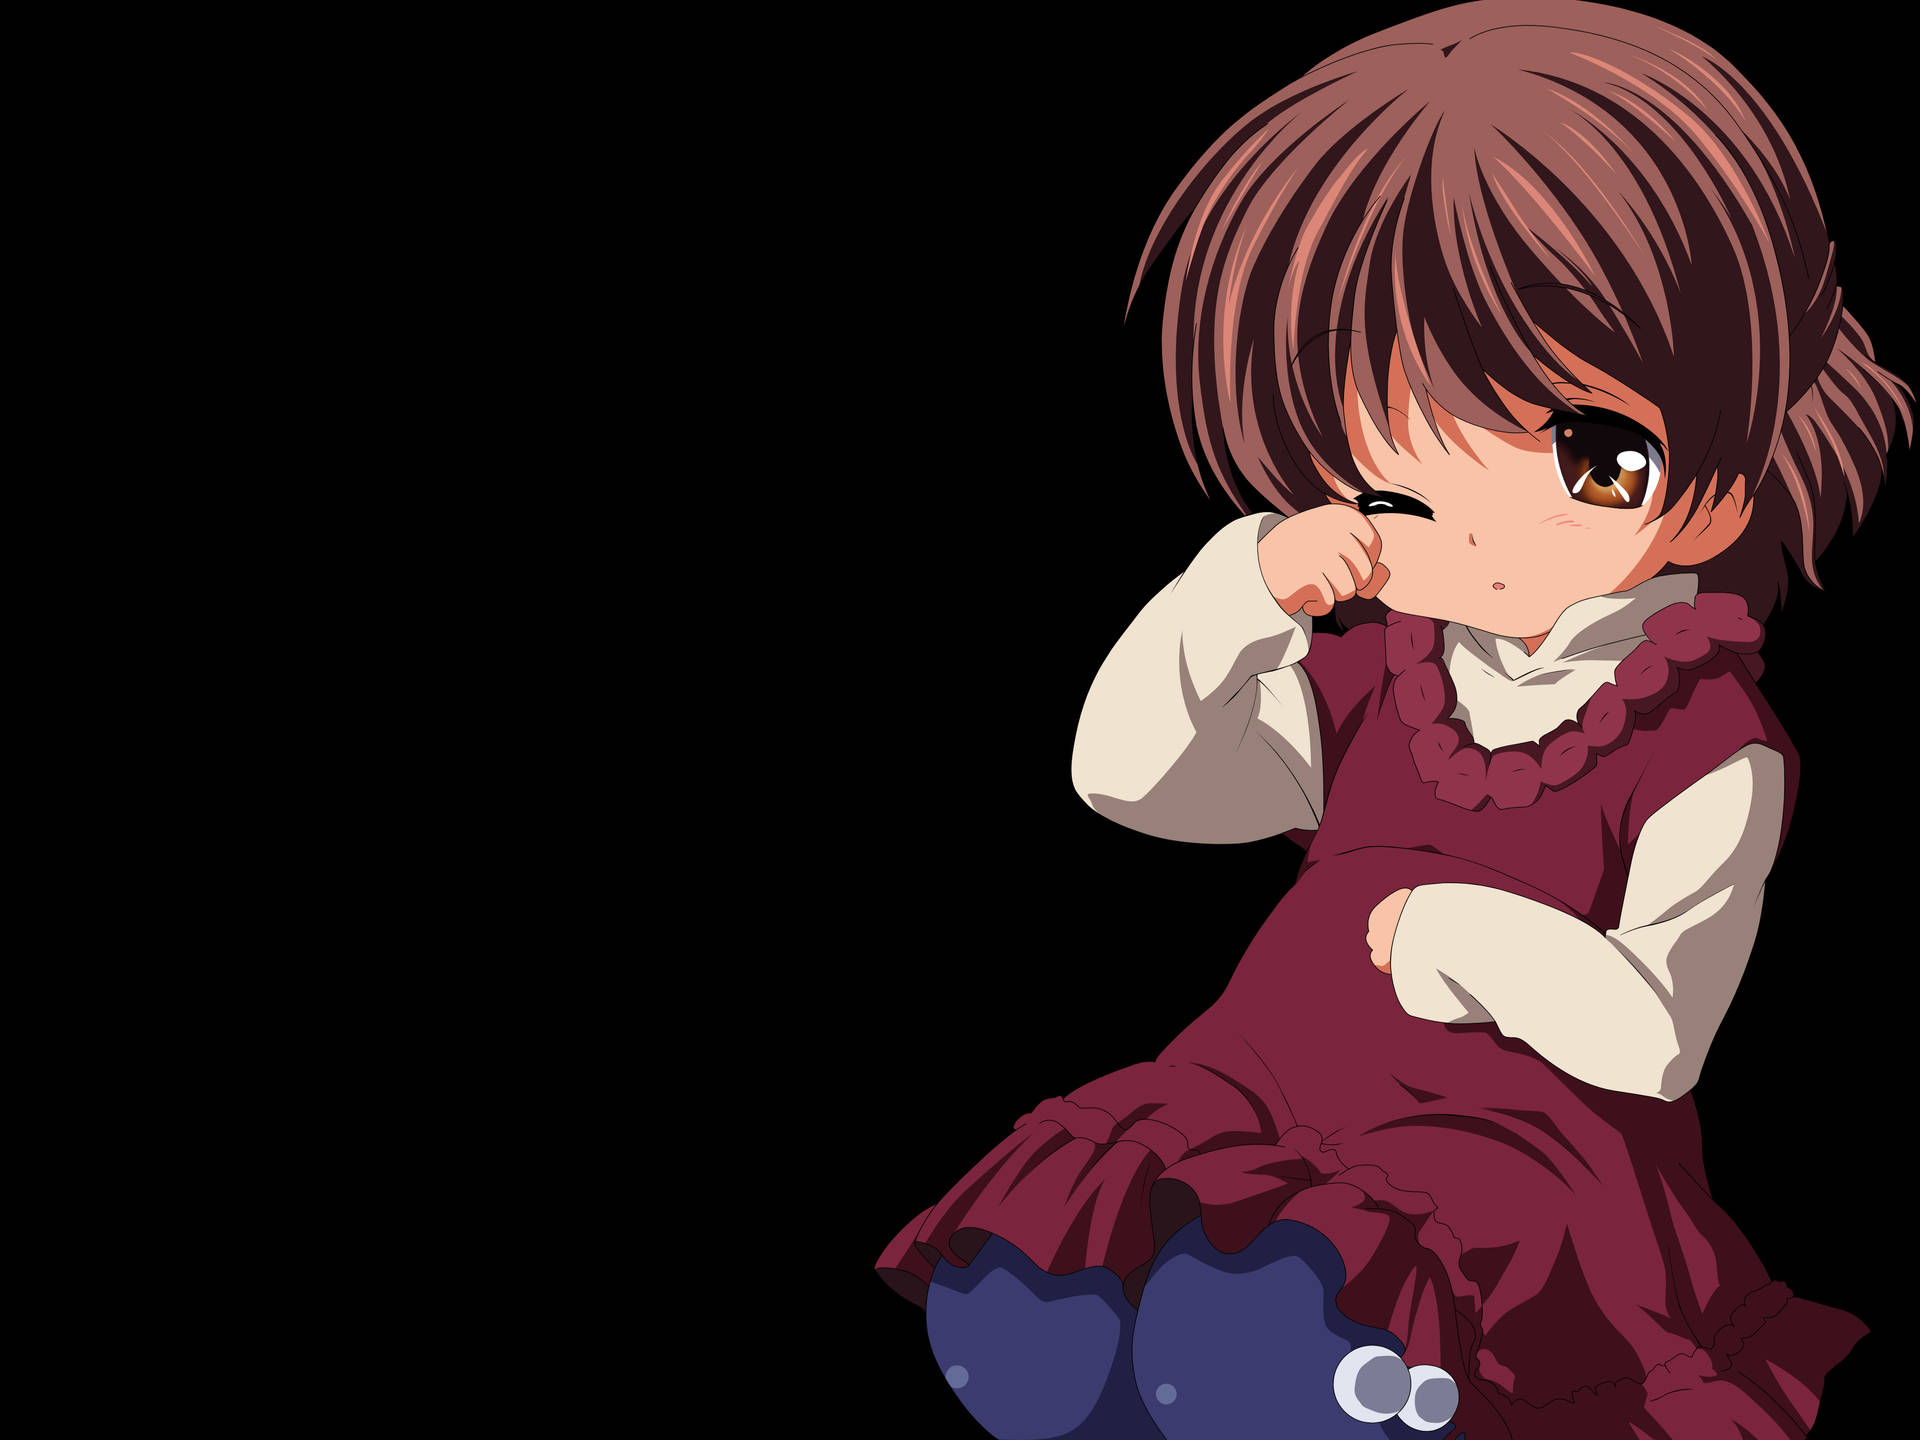 Clannad After Story, cute, anime, flowers, child, anime girl, clannad, HD  wallpaper